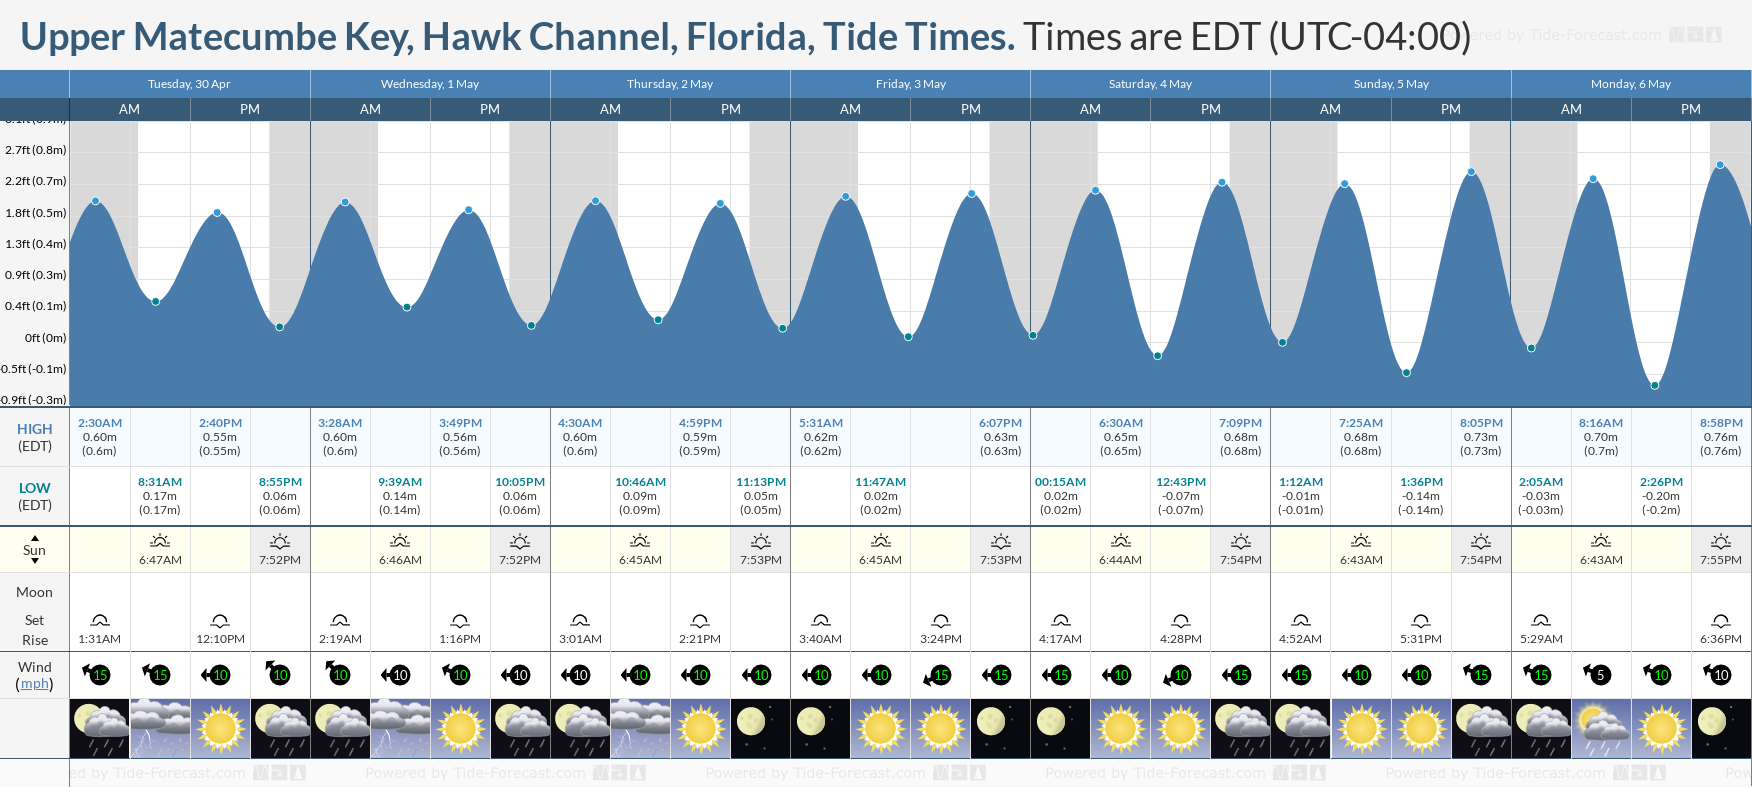 Upper Matecumbe Key, Hawk Channel, Florida Tide Chart including high and low tide tide times for the next 7 days